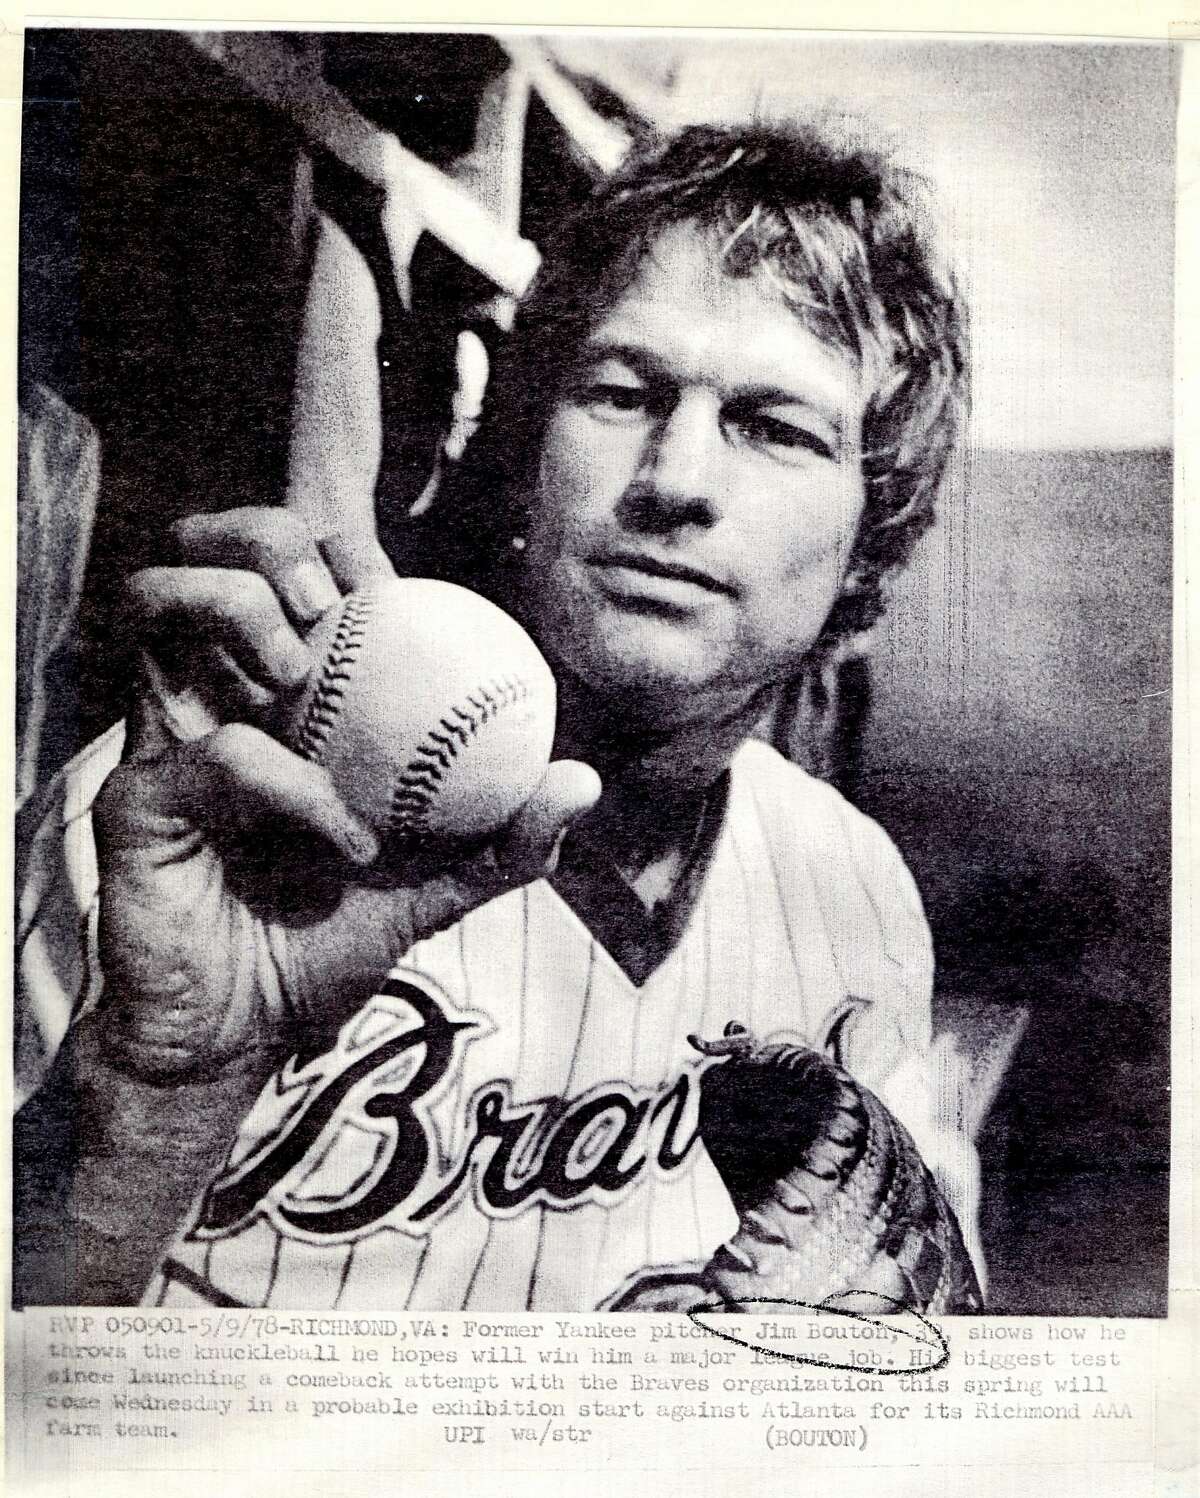 Jim Bouton shows off his knuckleball grip in a last-ditch comeback effort in 1978.